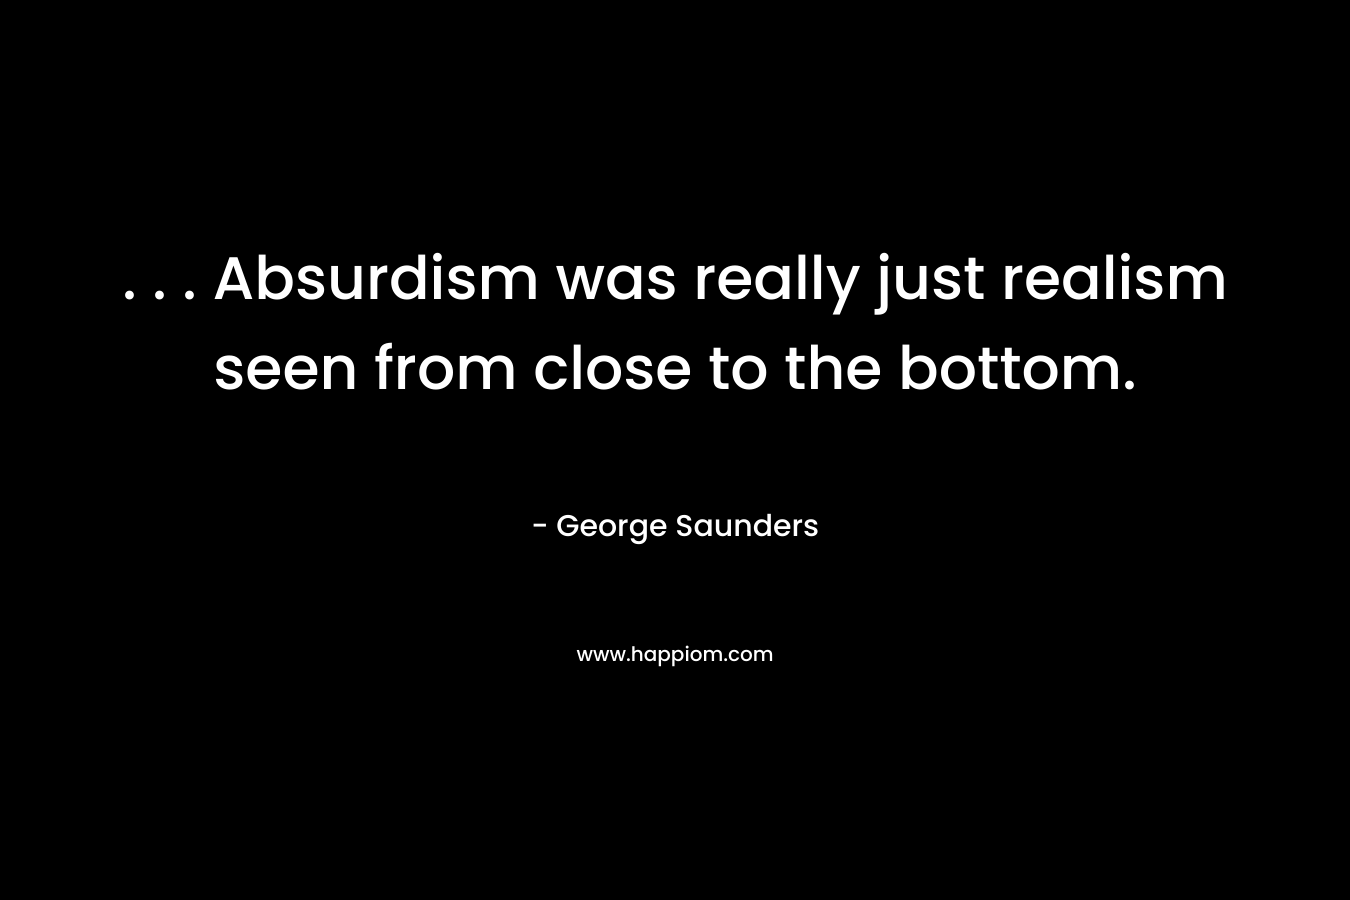 . . . Absurdism was really just realism seen from close to the bottom.